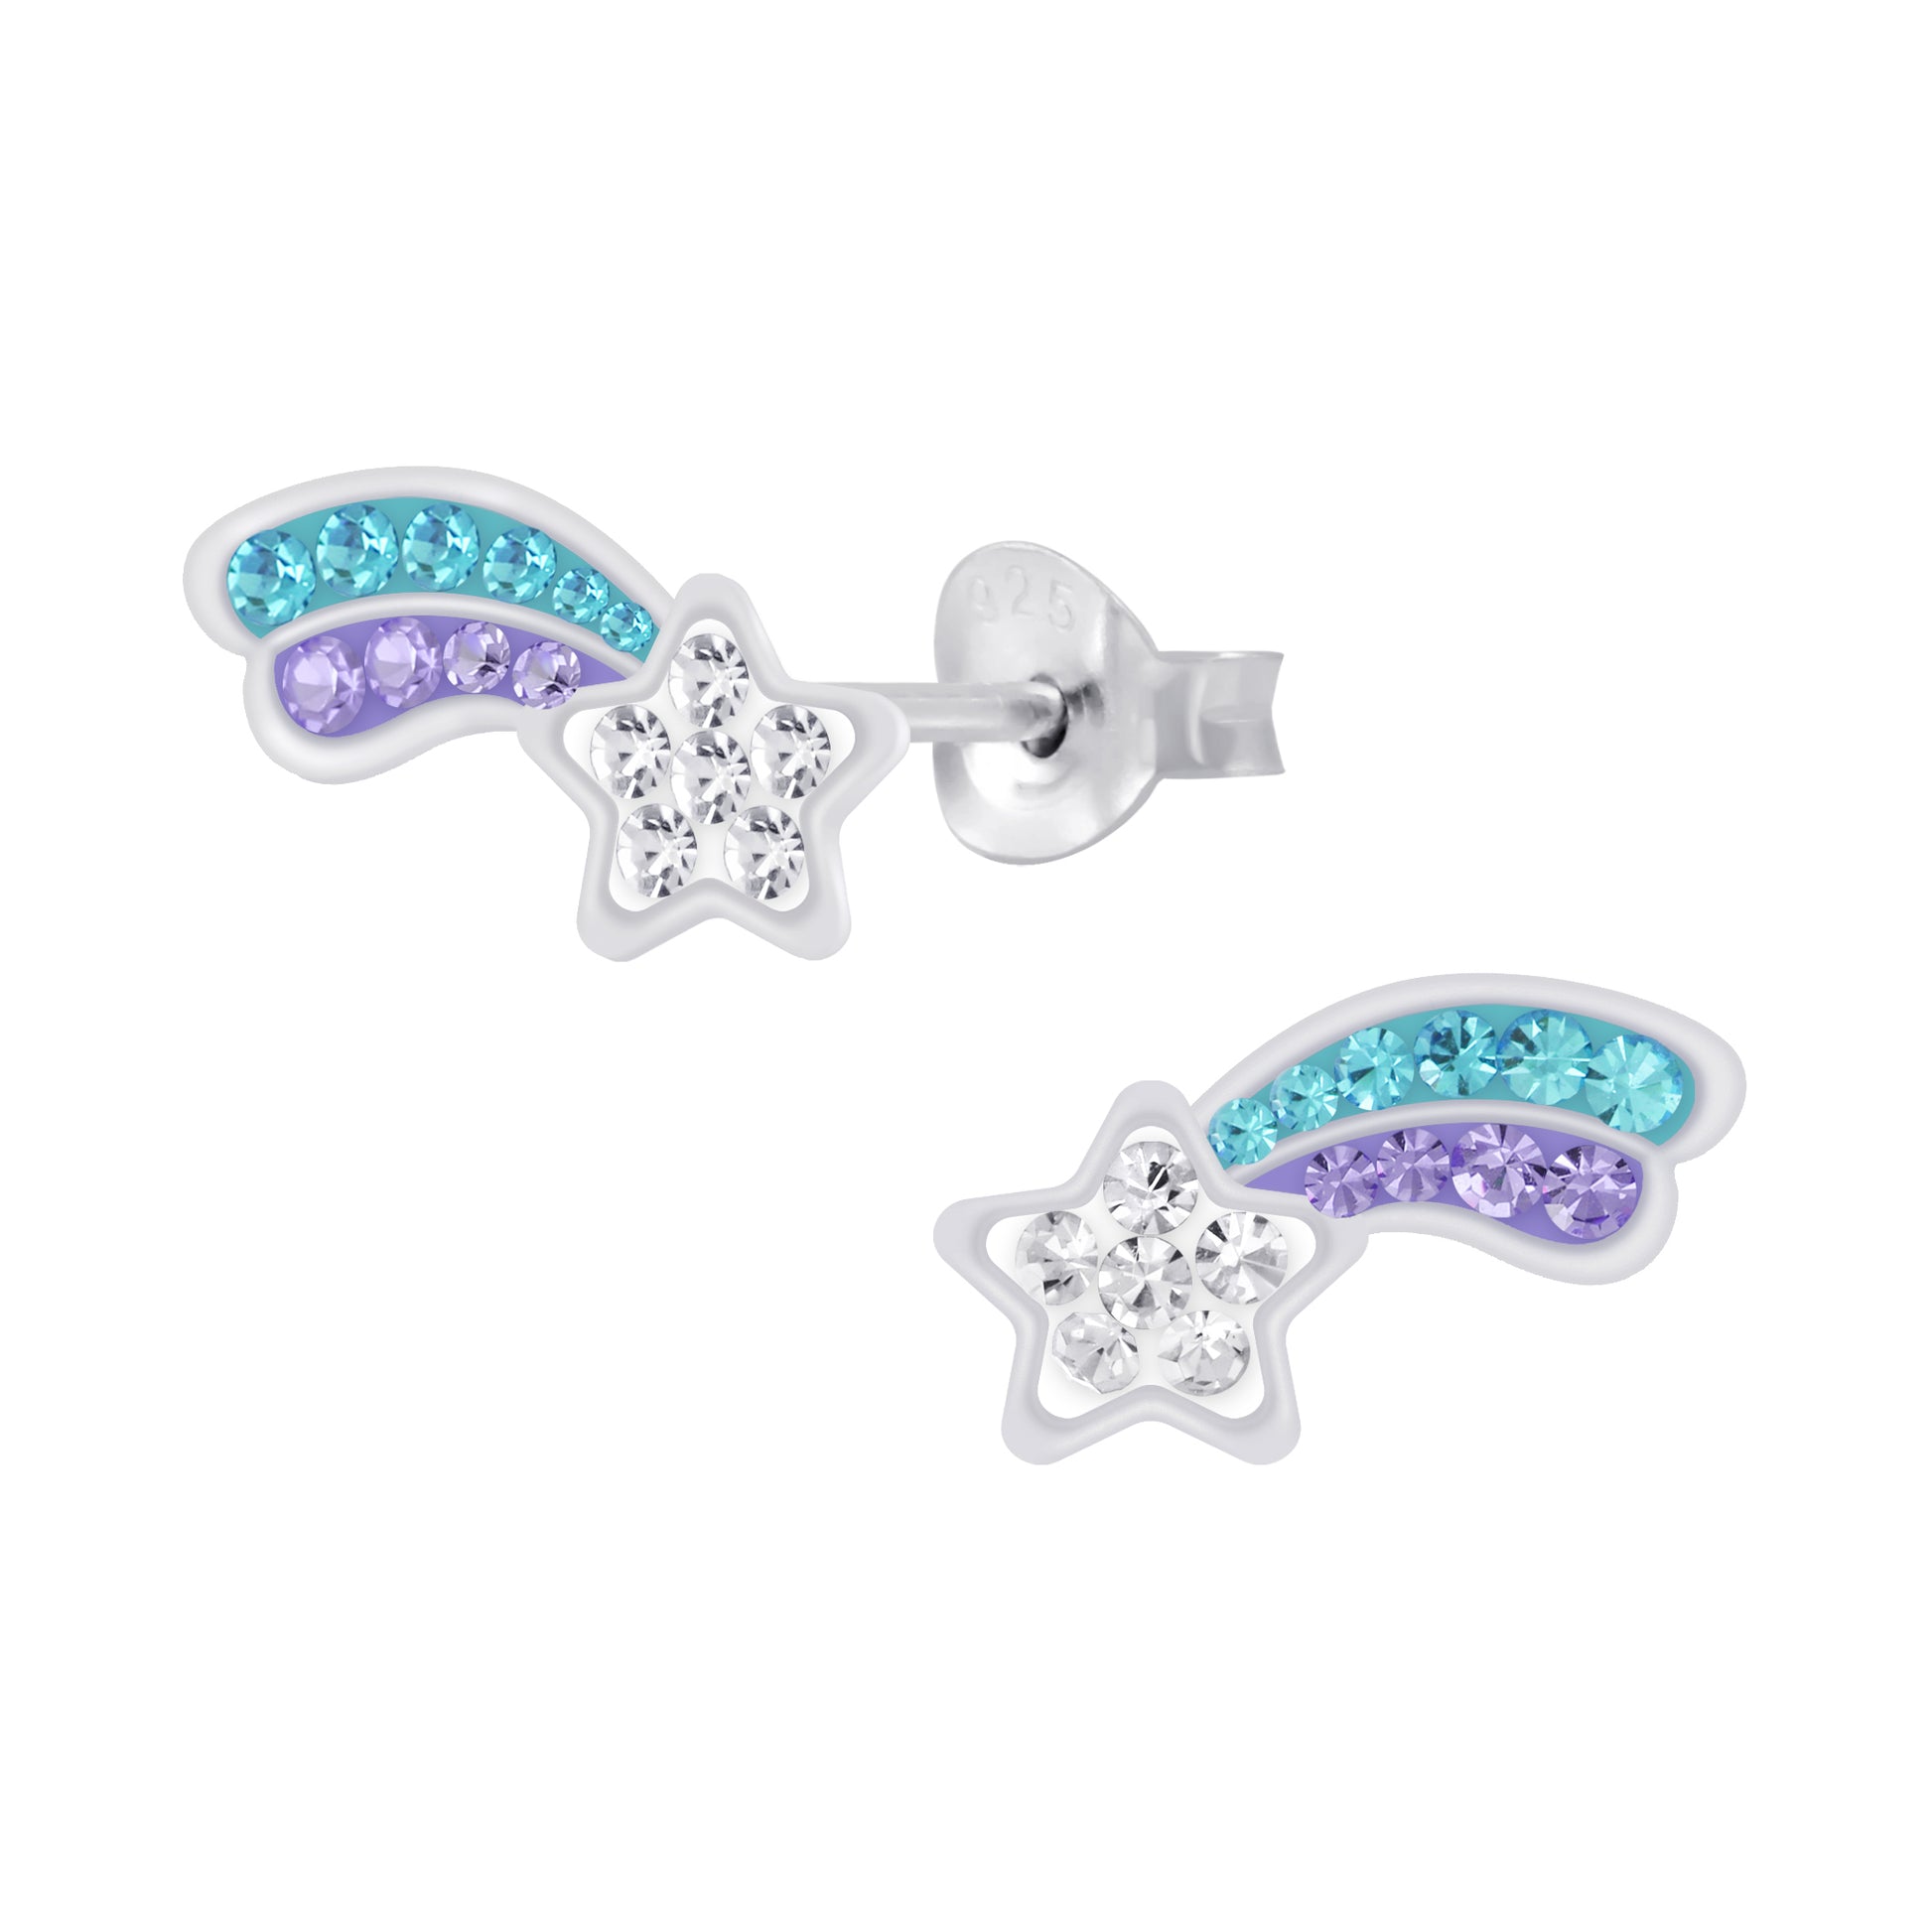 Shooting star sterling silver earrings with  turquoise blue and lilac purple crystals 